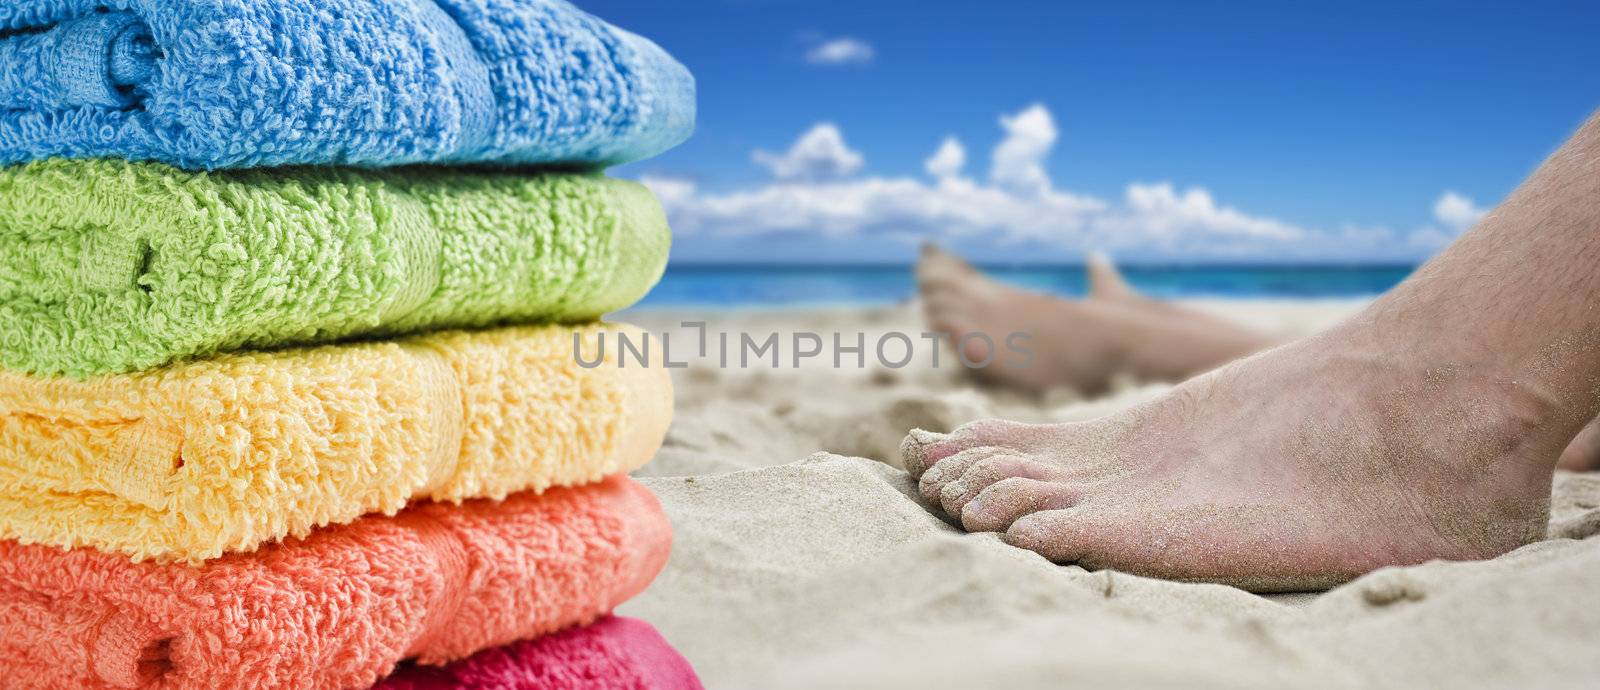 Colorful towels and bare feet on the beach by tish1